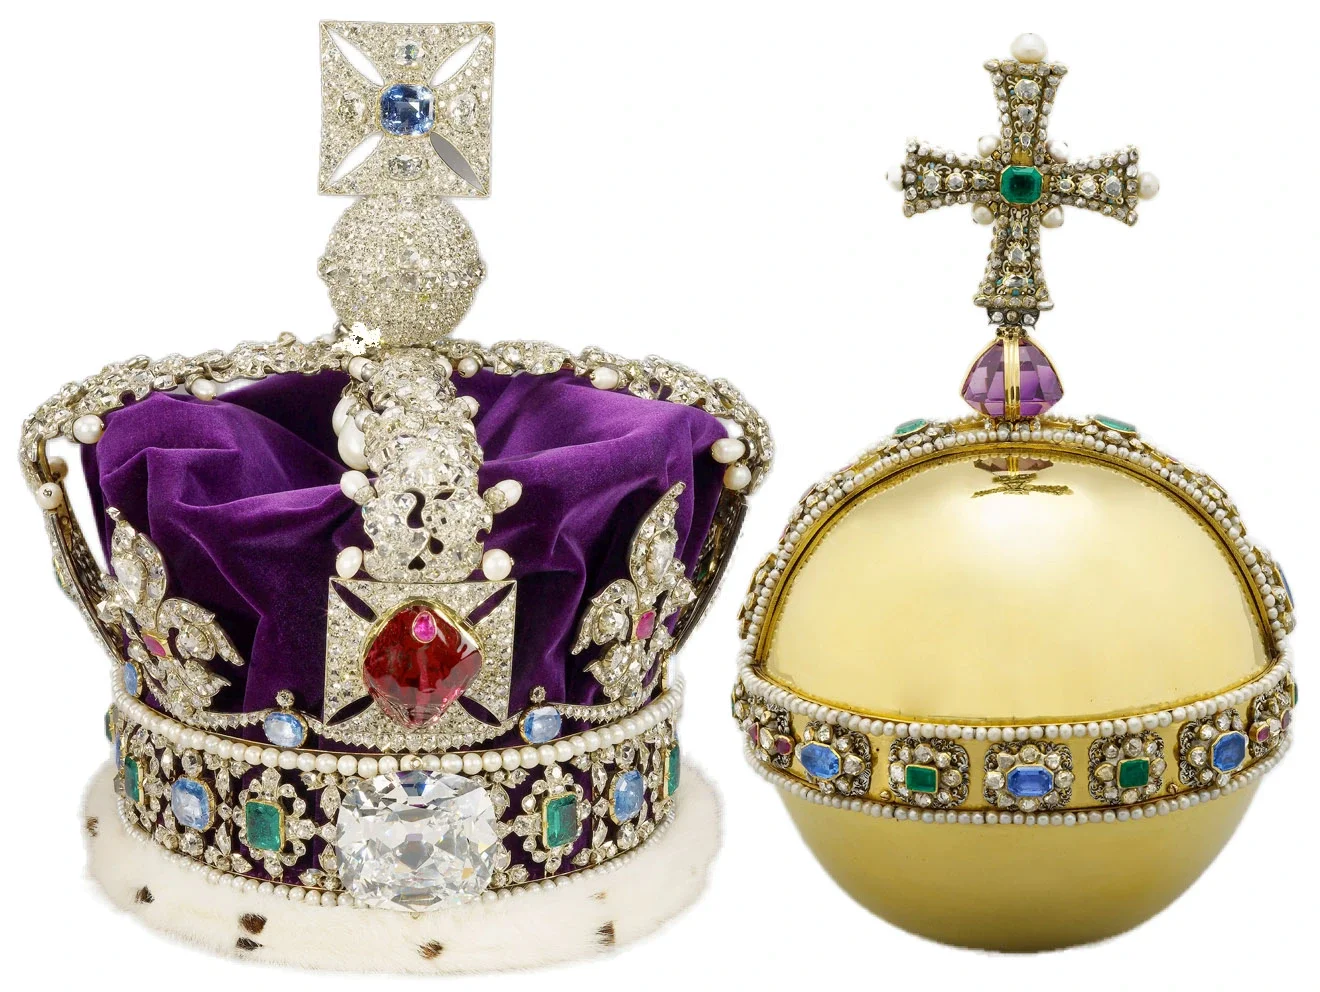 How valuable are the Crown Jewels?